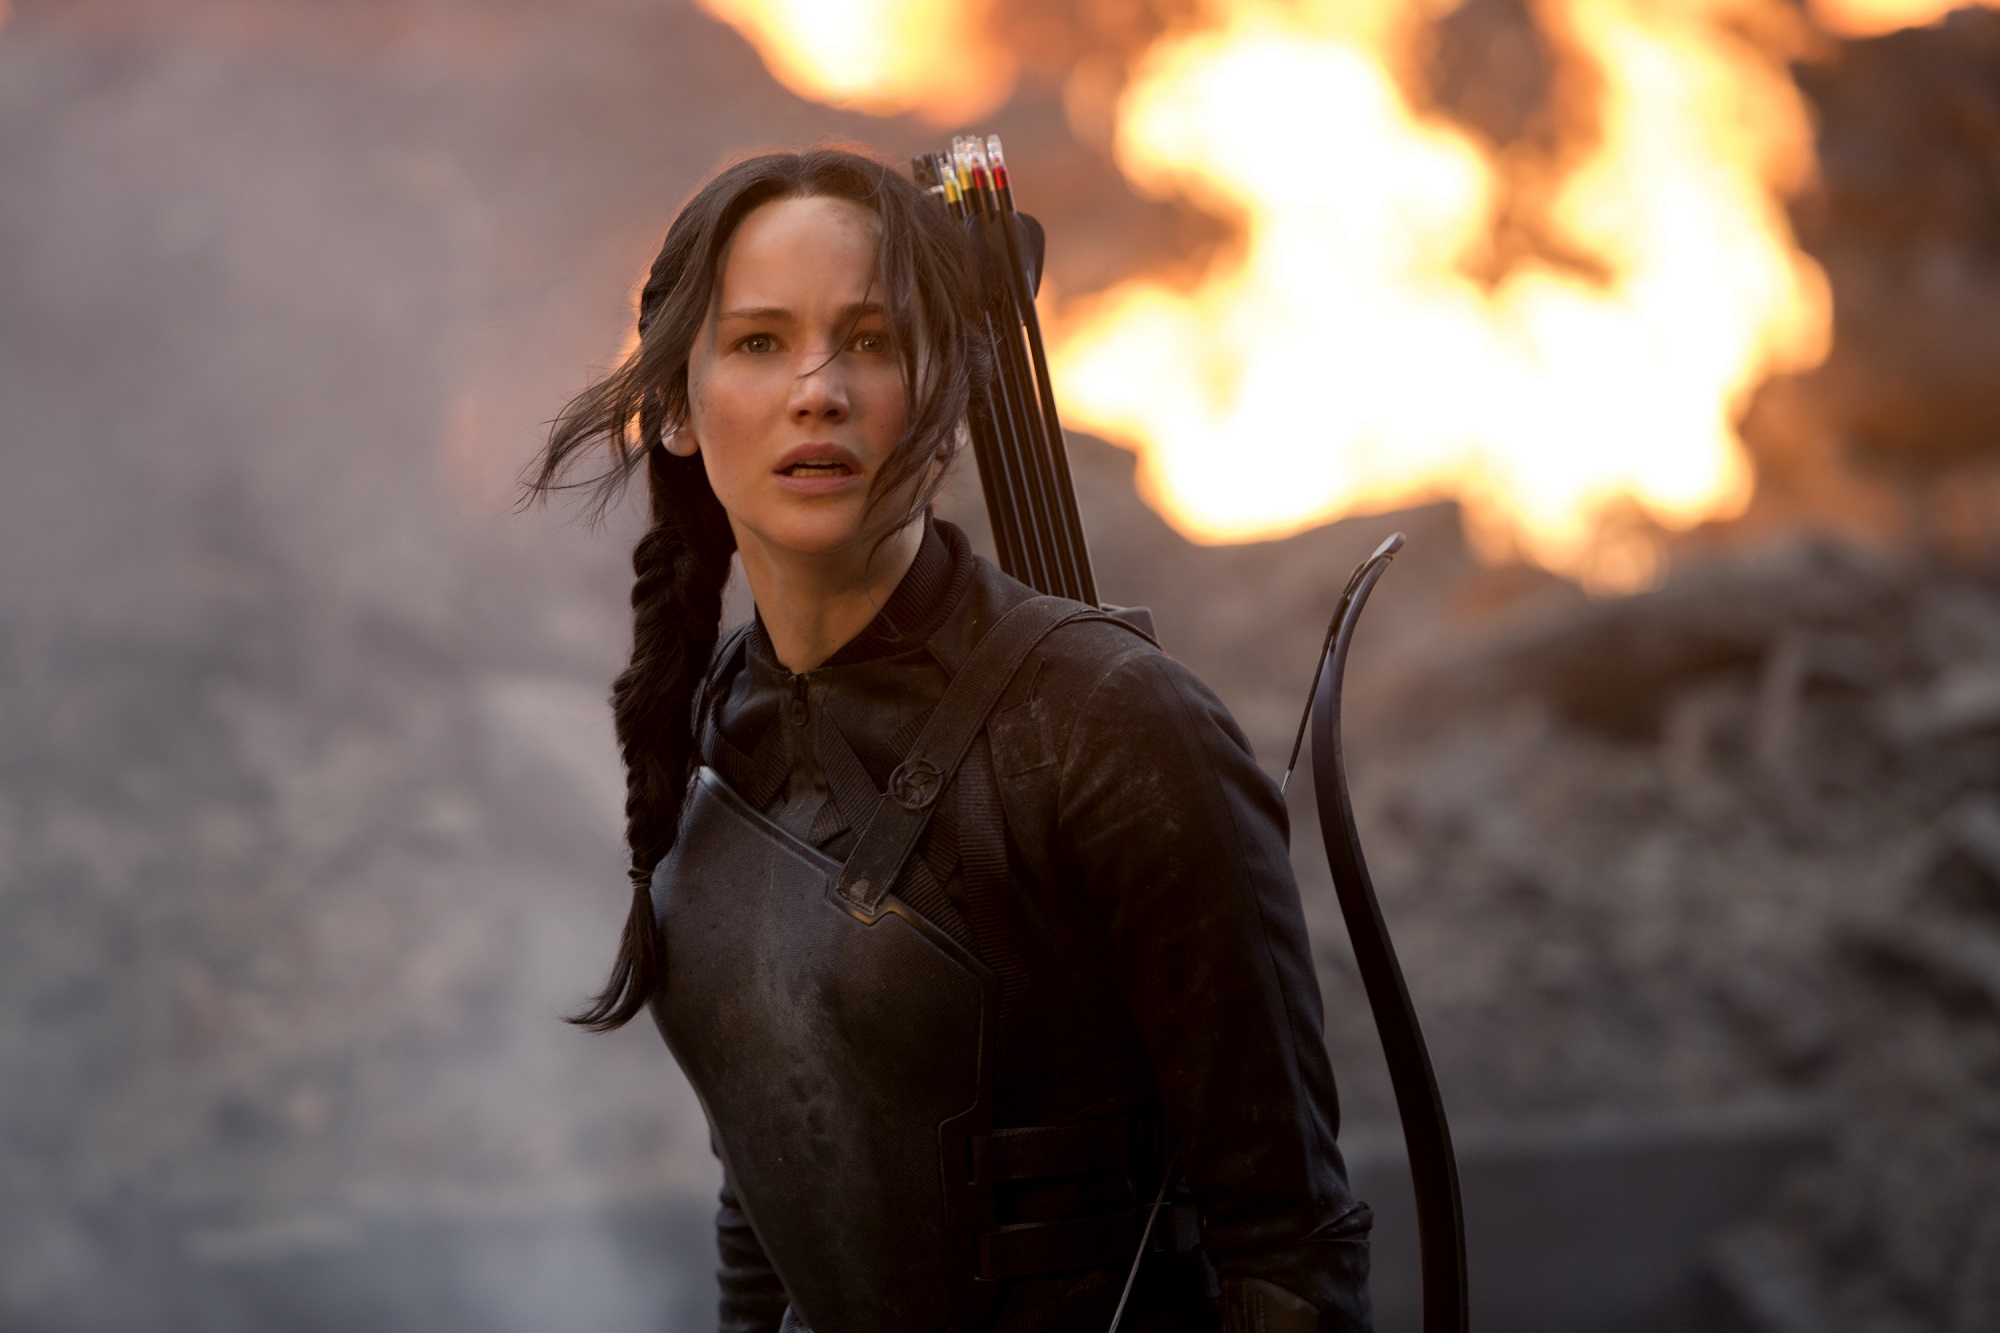 ‘the hunger games: mockingjay part 2’ promo poster reveal